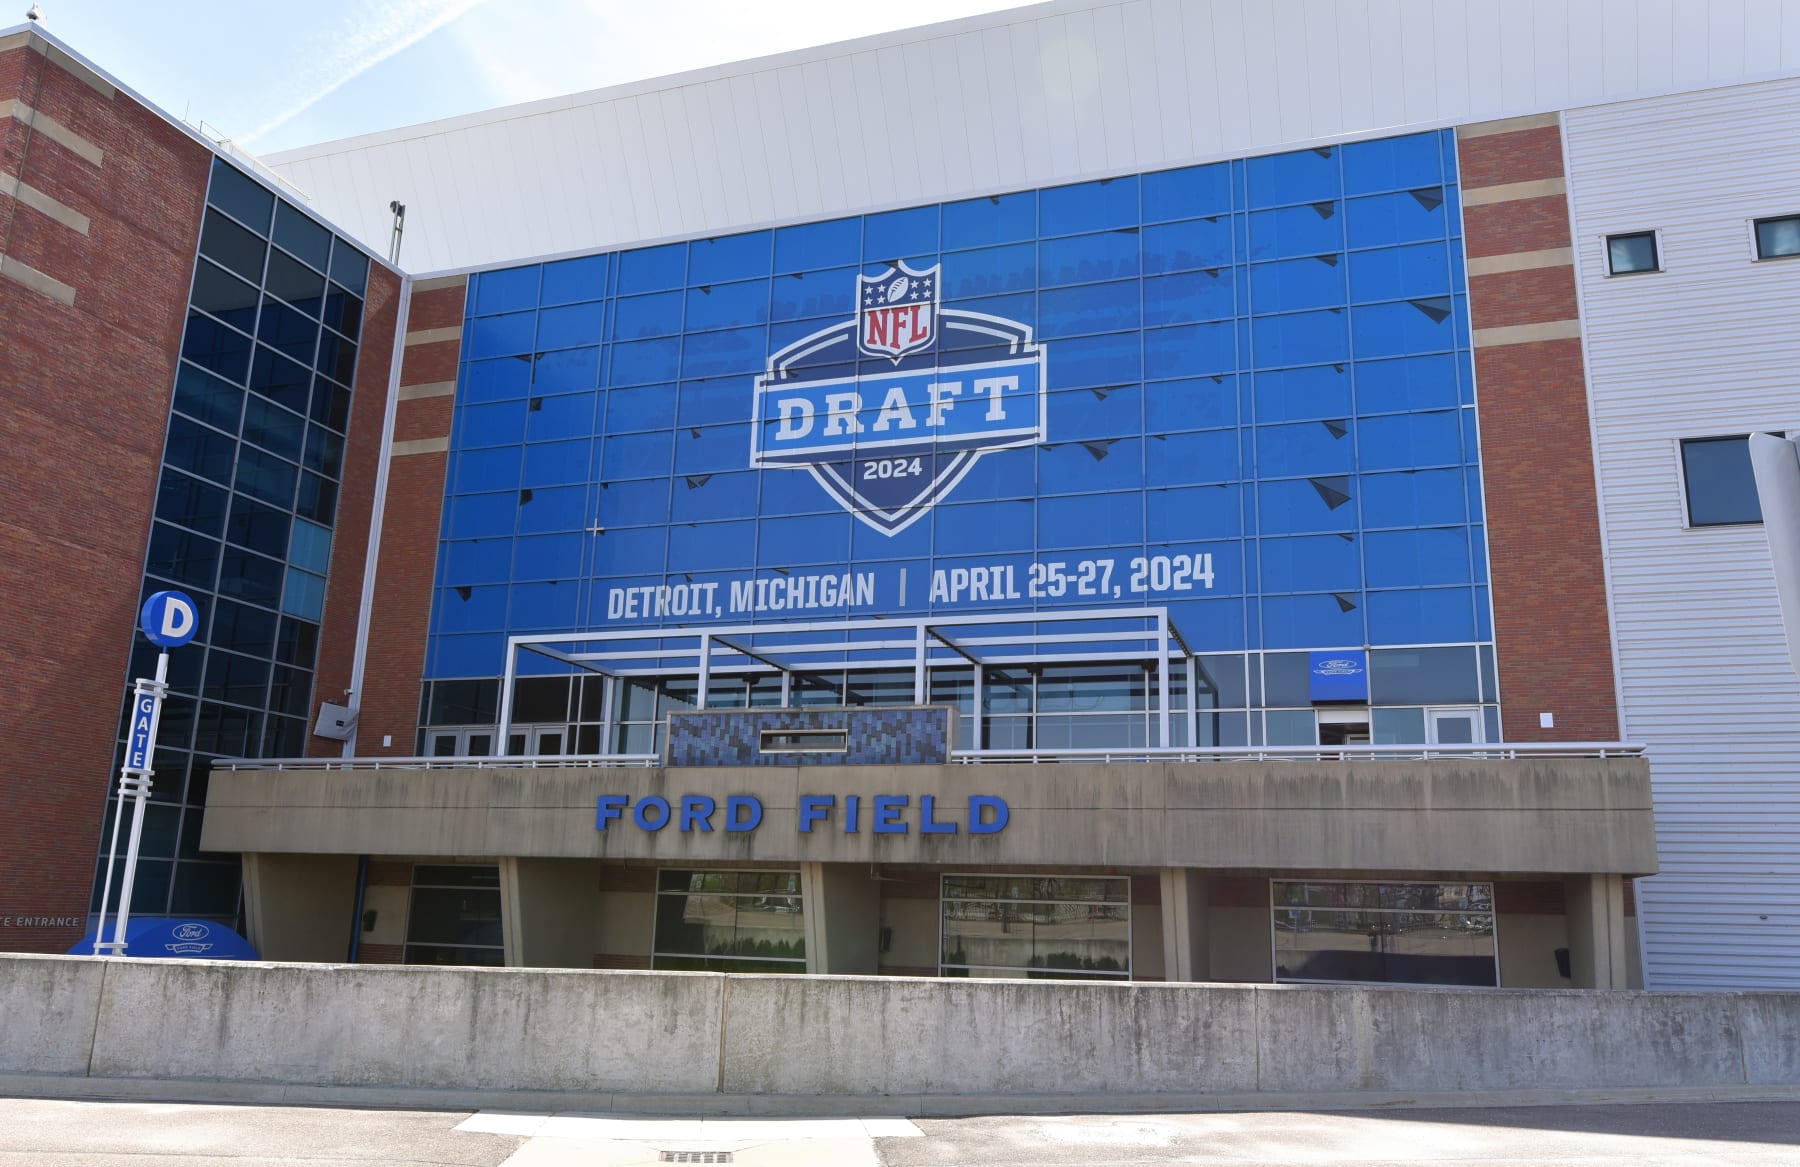 NFL News: These 5 Cities Are Battling to Be the Next NFL Draft Destination